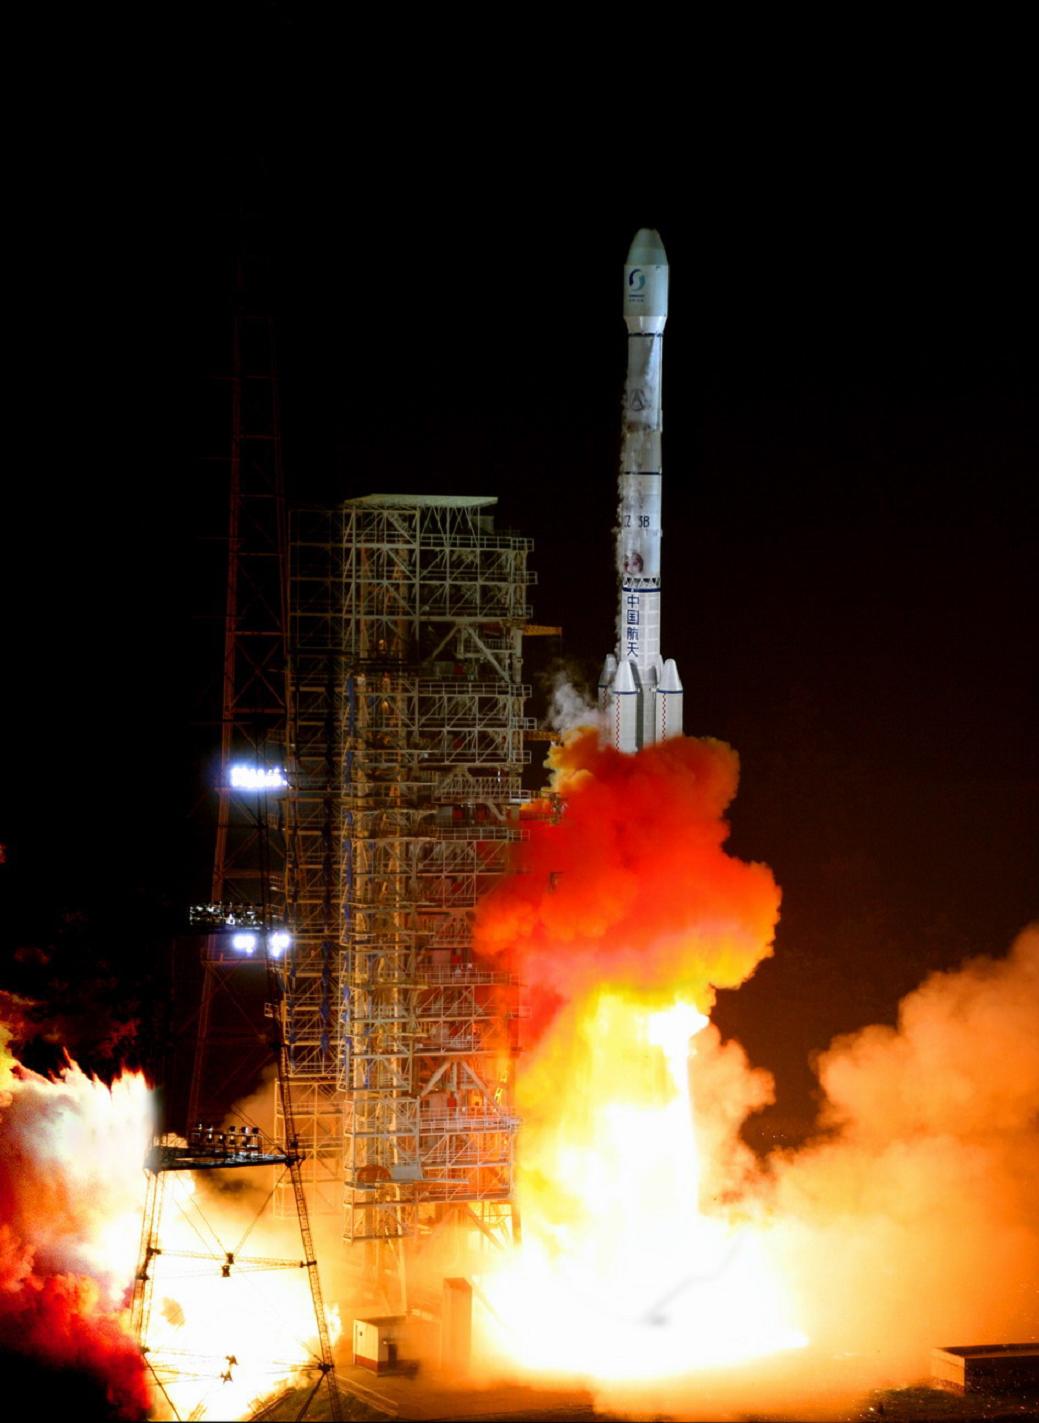 China’s Long March Rocket Booster Makes Uncontrolled Reentry Back to Earth